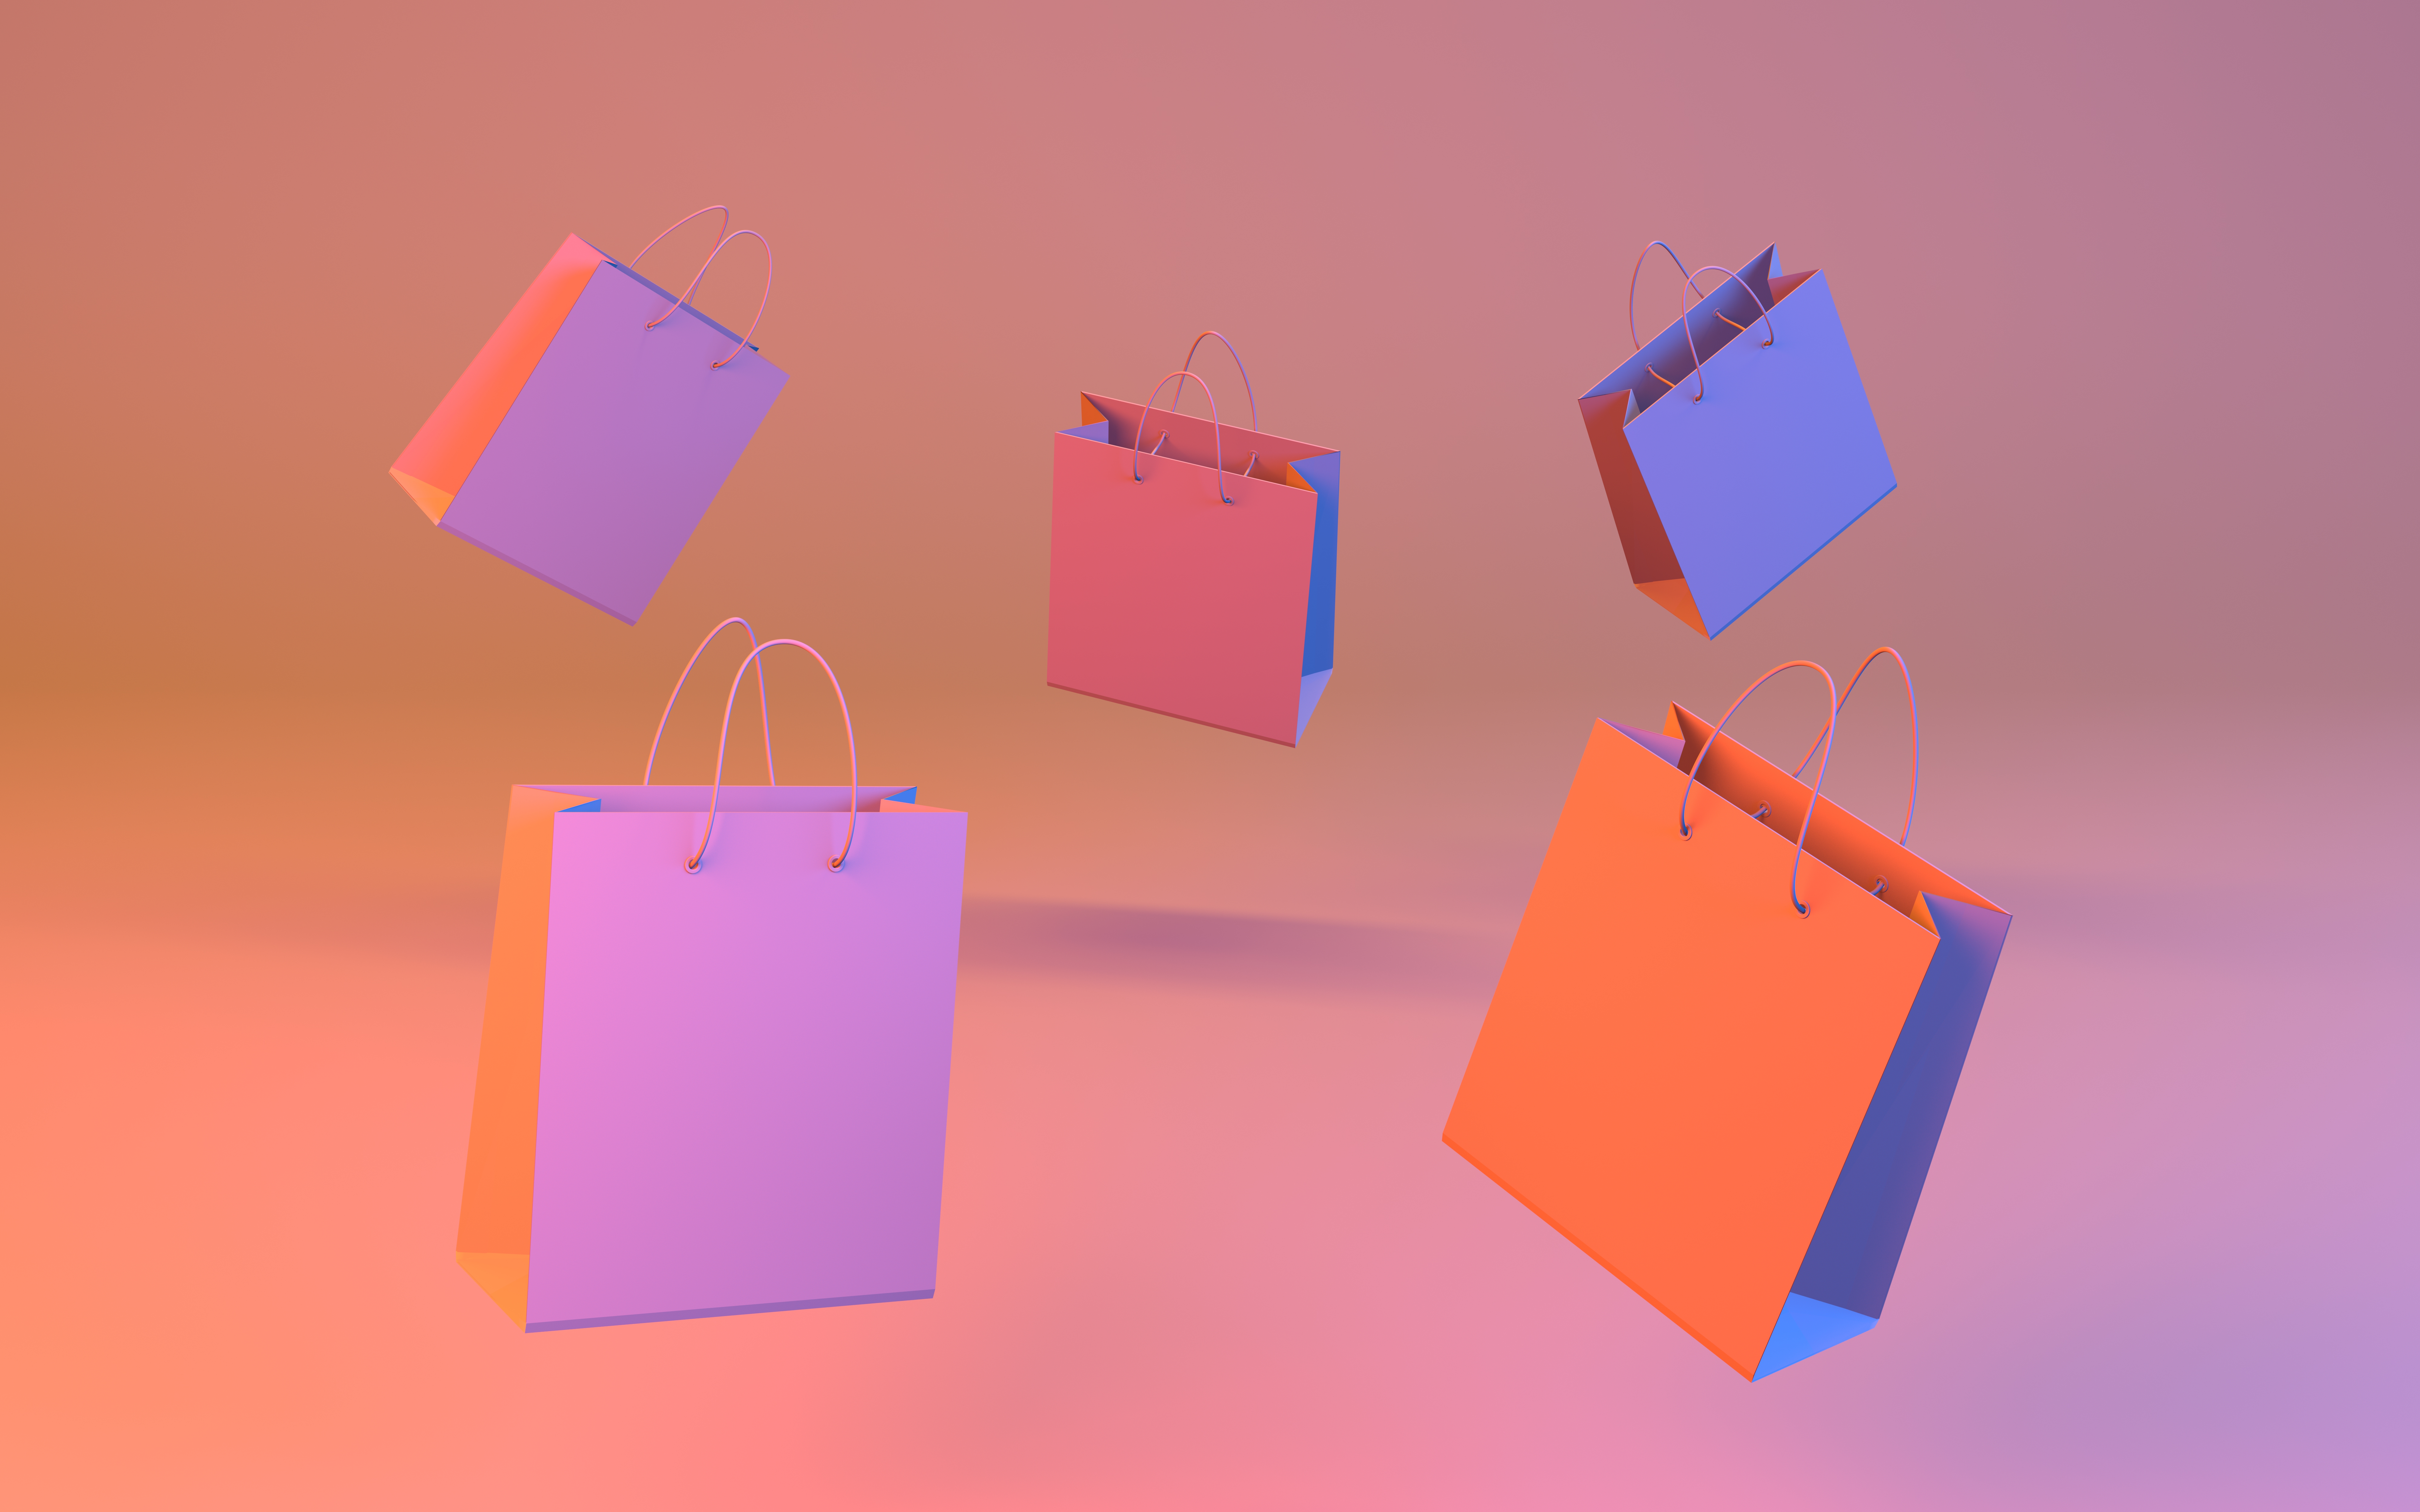 Shopping bags. Group of multicolored blank gift bags